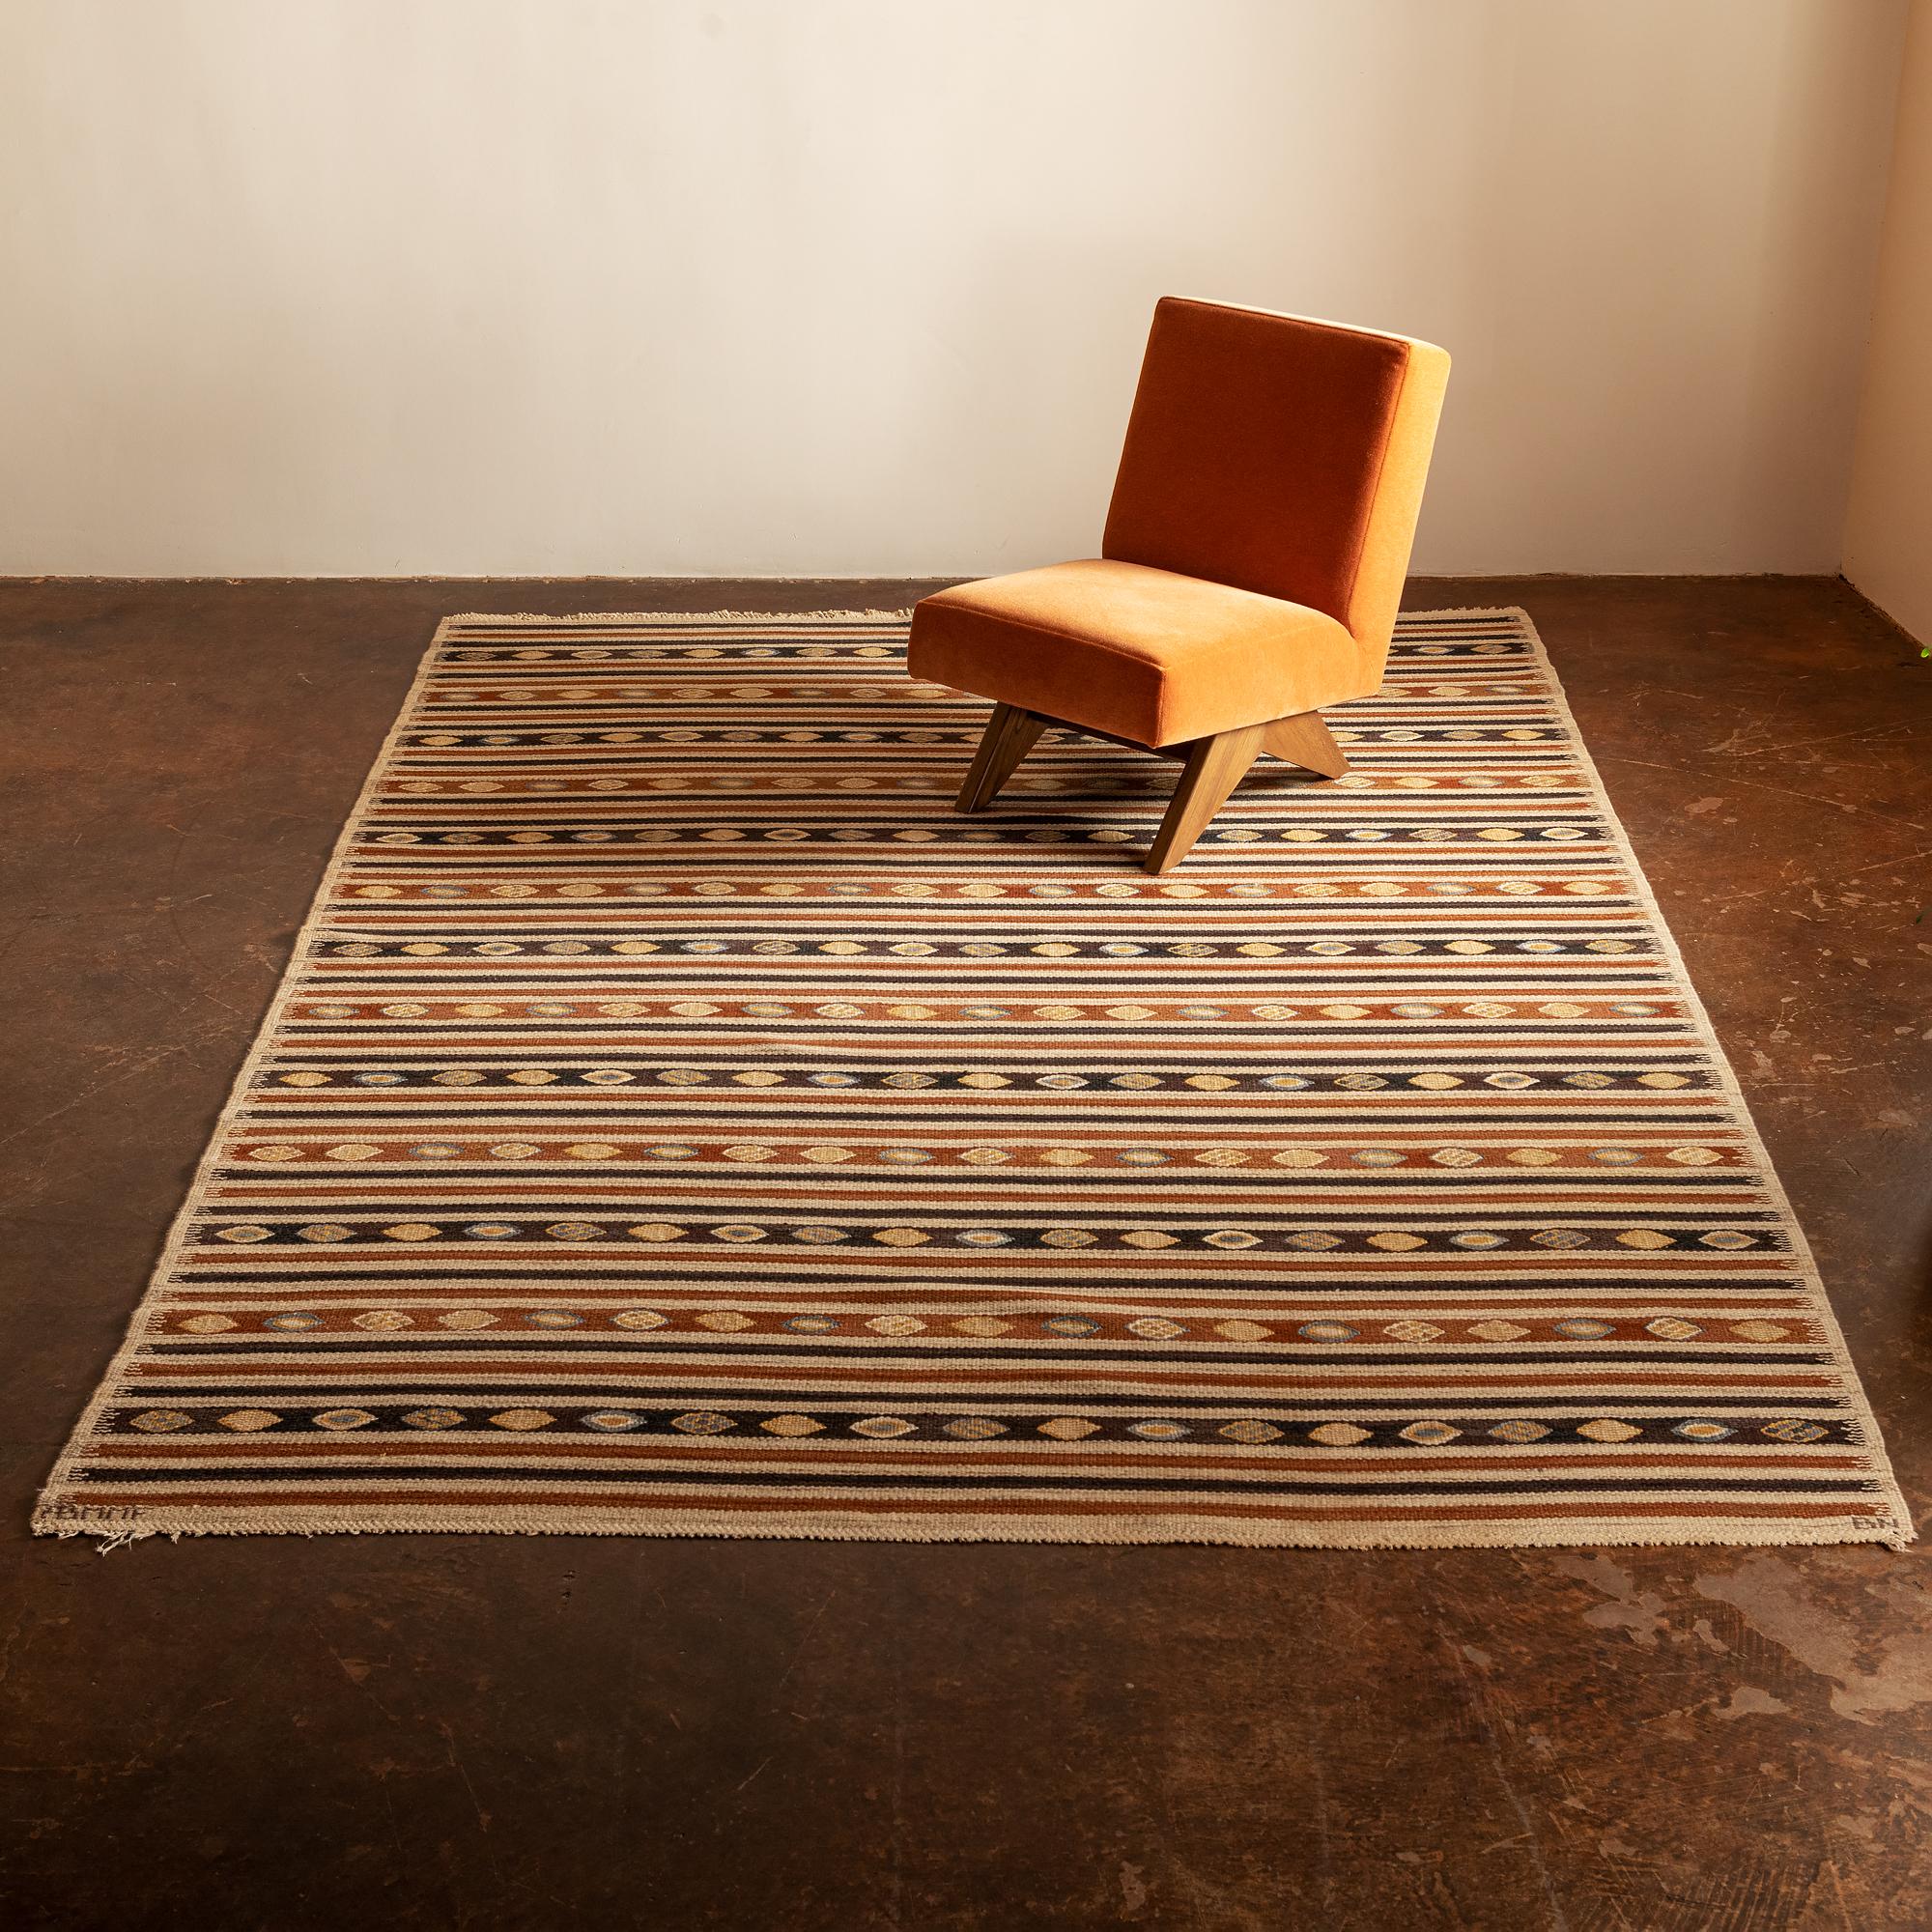 A classic Swedish Gobeläng designed by Barbro Nilsson in 1946. This original rug from the studio of Märta Måås-Fjetterstrom was handwoven in wool on linen warp in cognac, coffee, sky blue and ochre.  A design classic. Signed BN, ABMMF, Bastad,